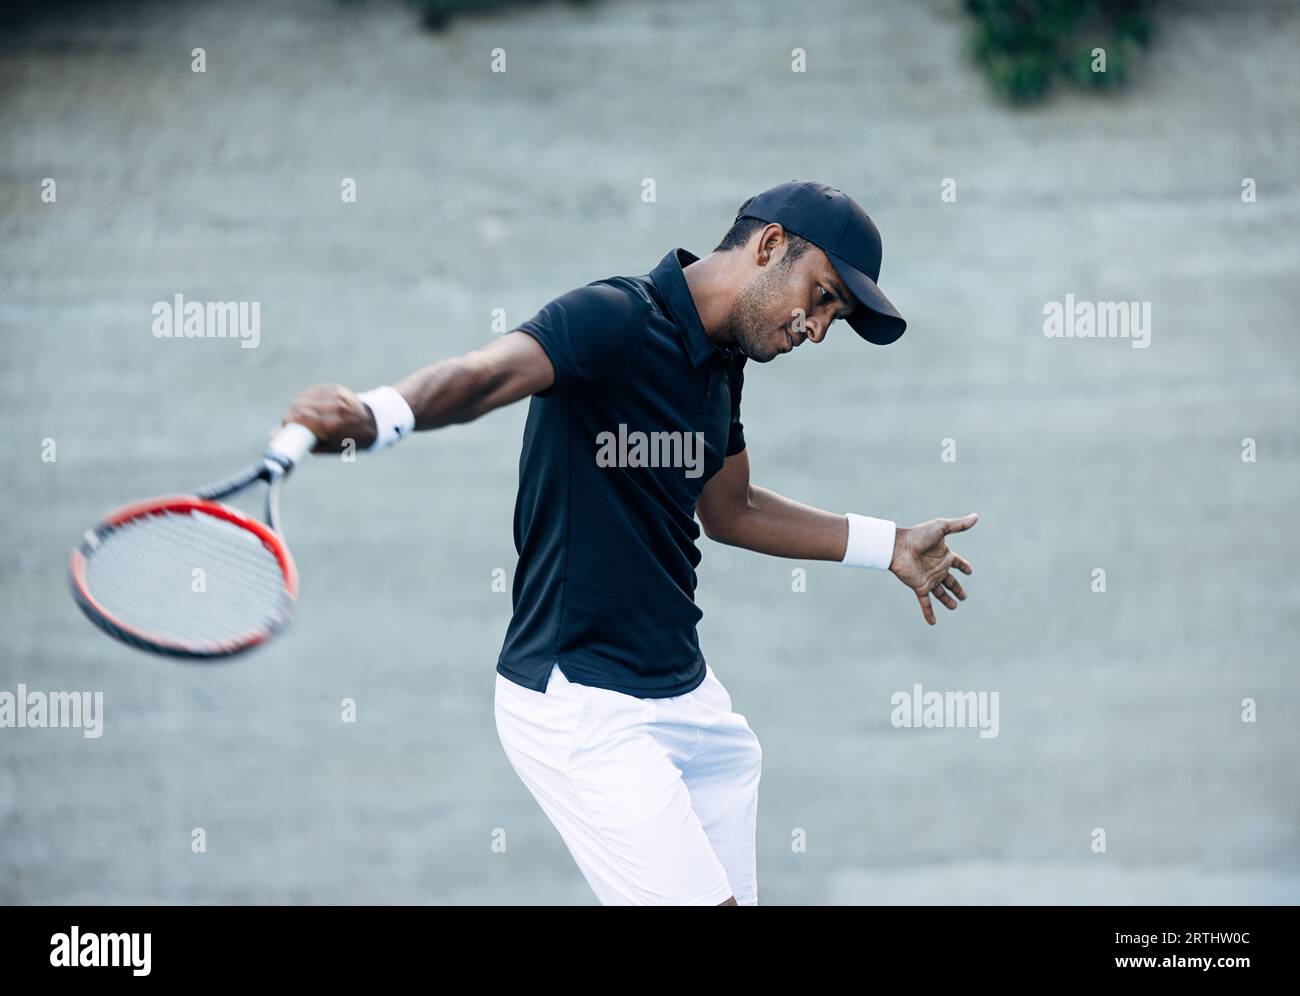 Male tennis player practicing hit outdoors. Professional tennis player spending time on a hard court. Stock Photo